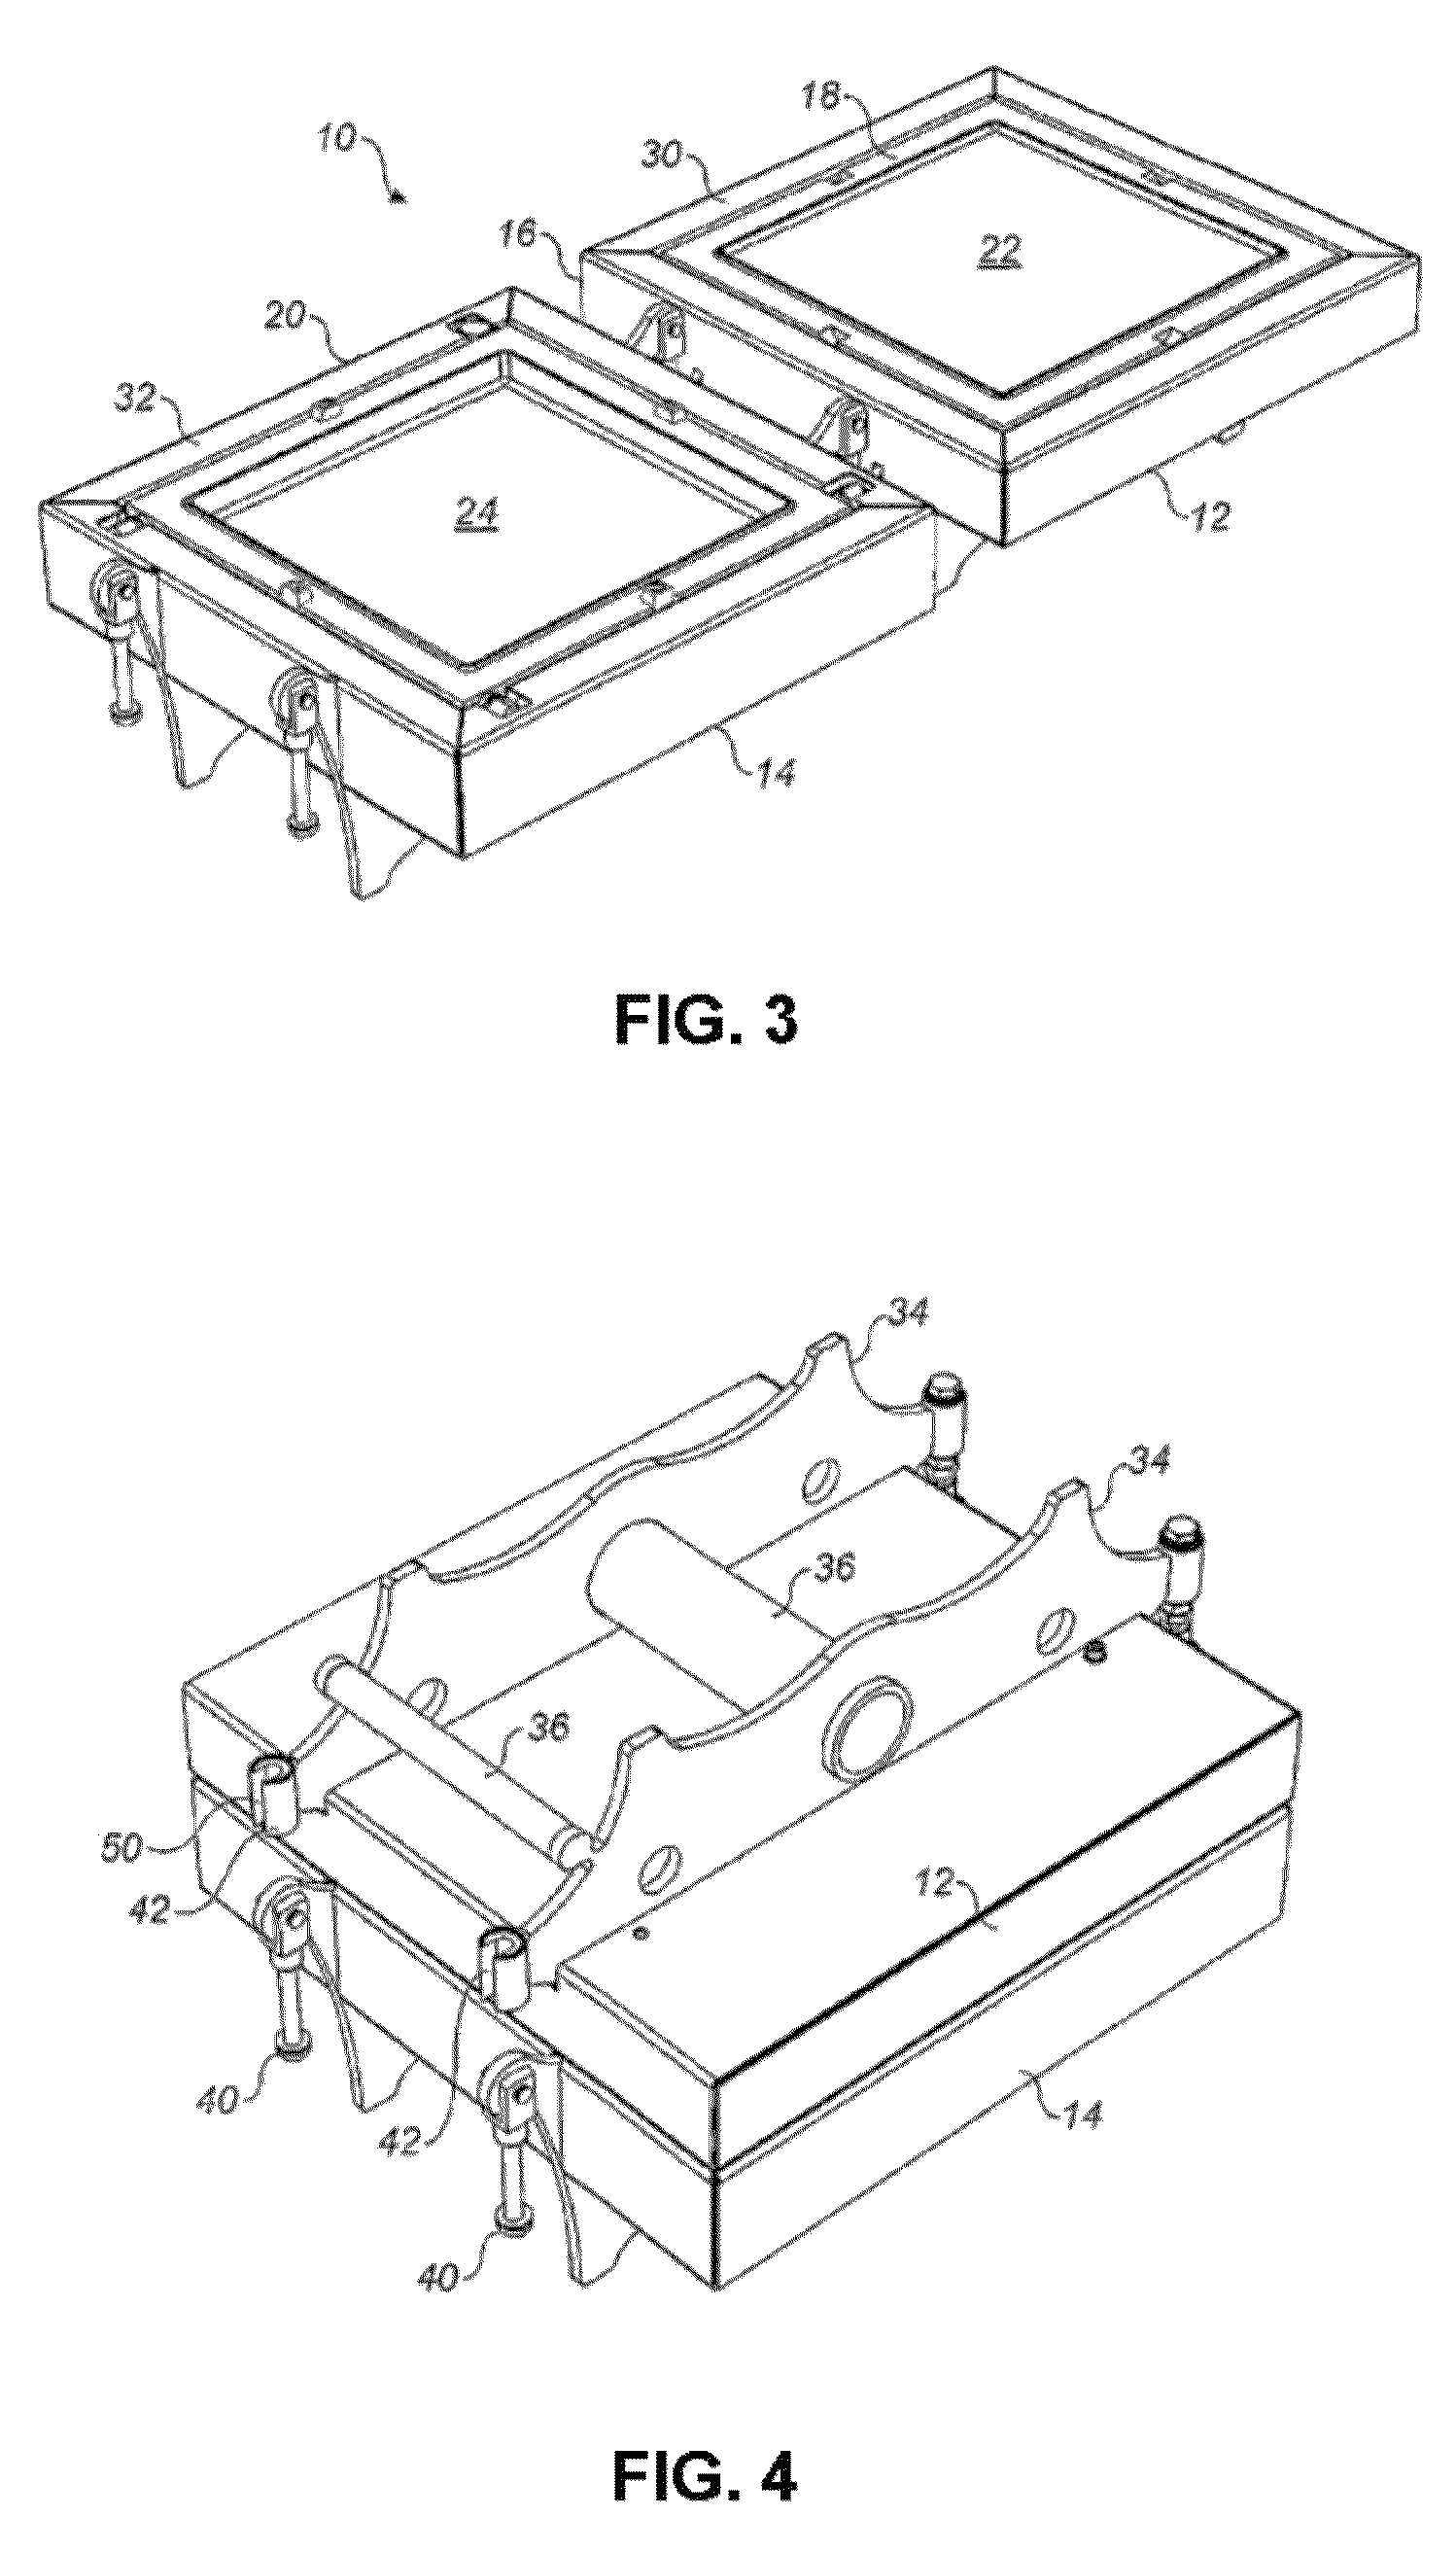 Carpet waste composite product and method for making same